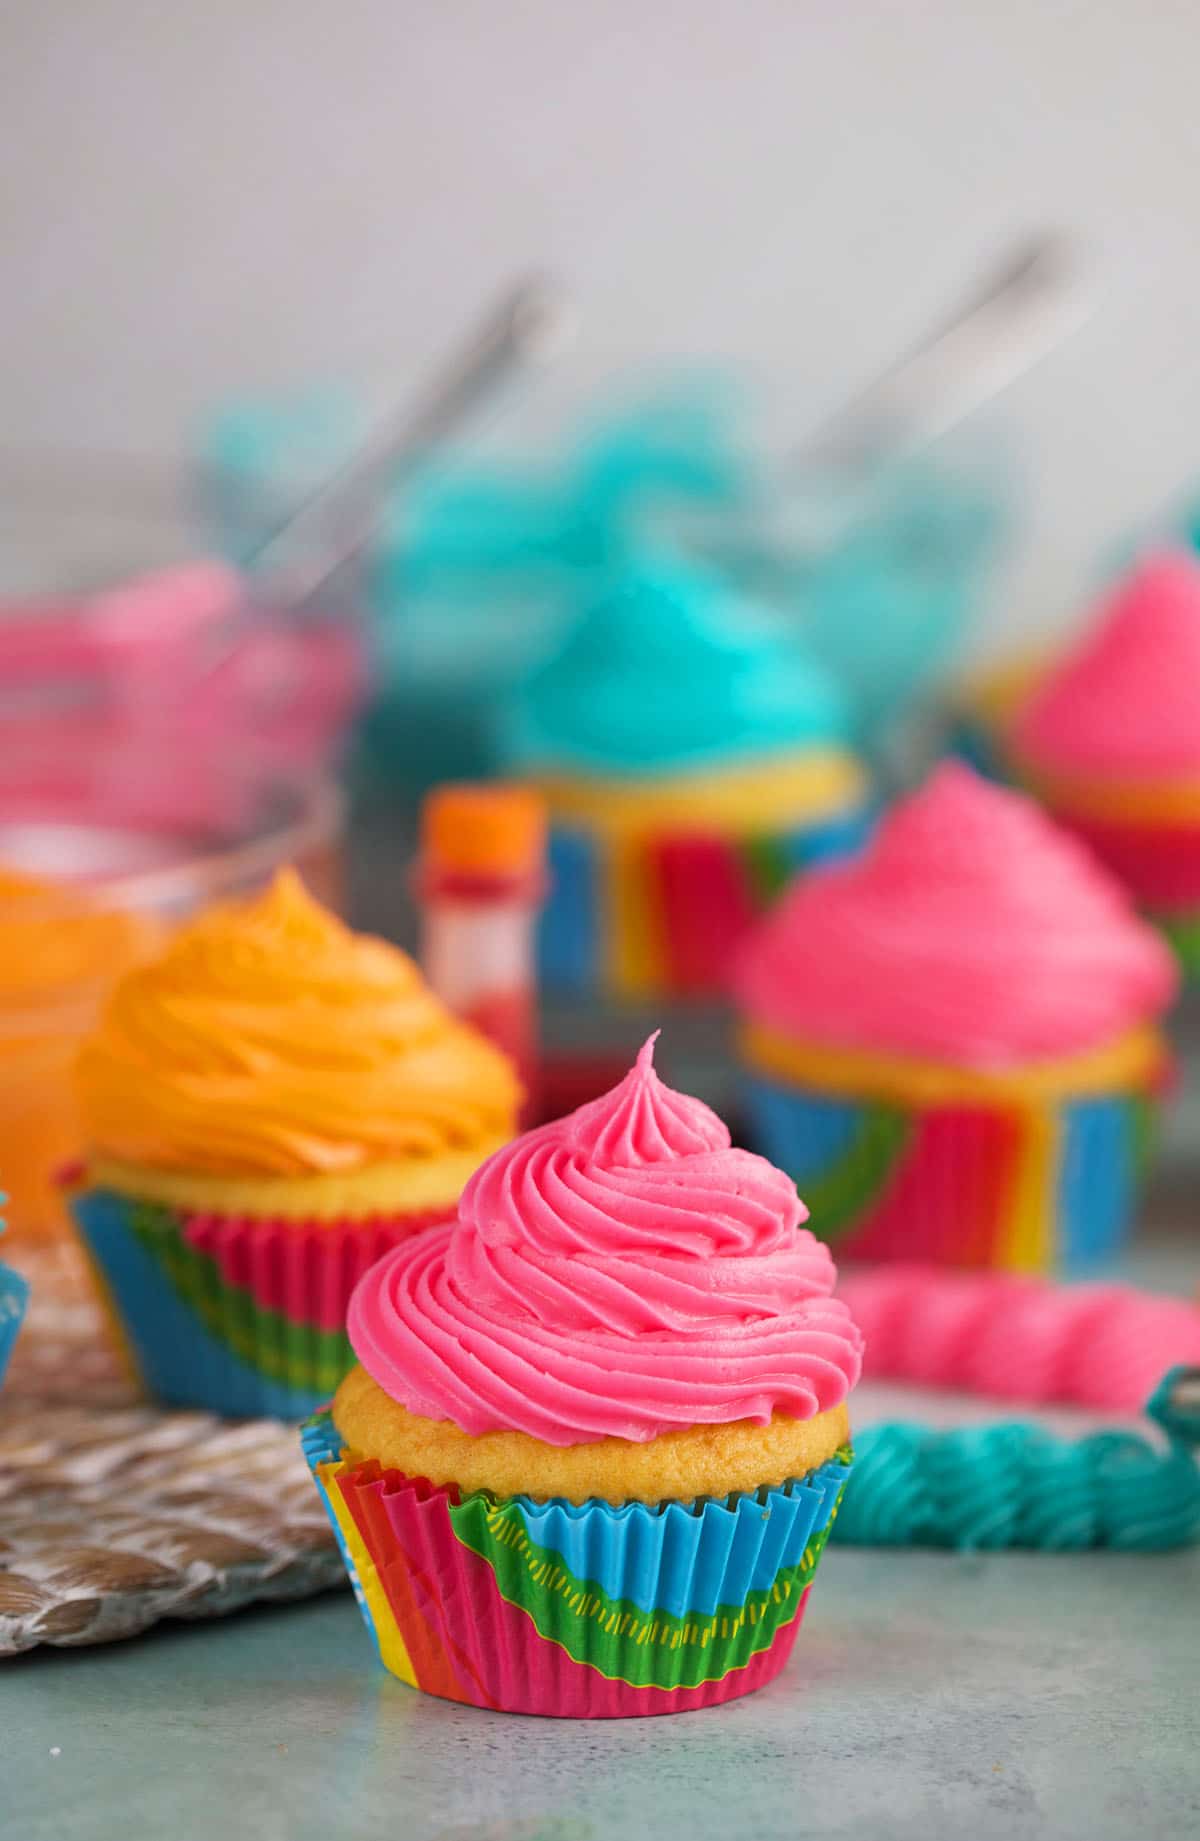 Pink, blue, and orange frosted cupcakes are presented on a countertop.